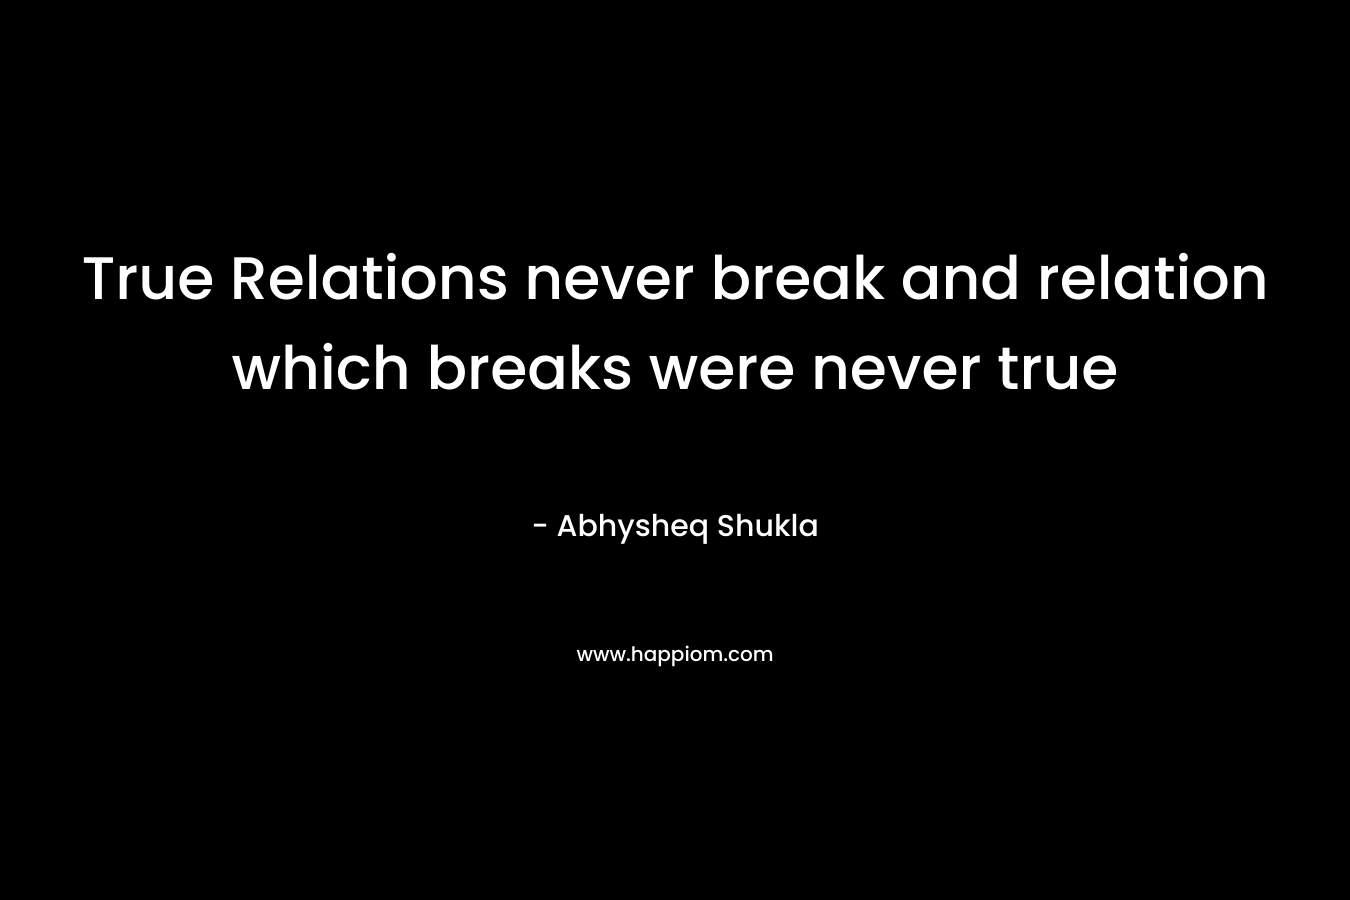 True Relations never break and relation which breaks were never true